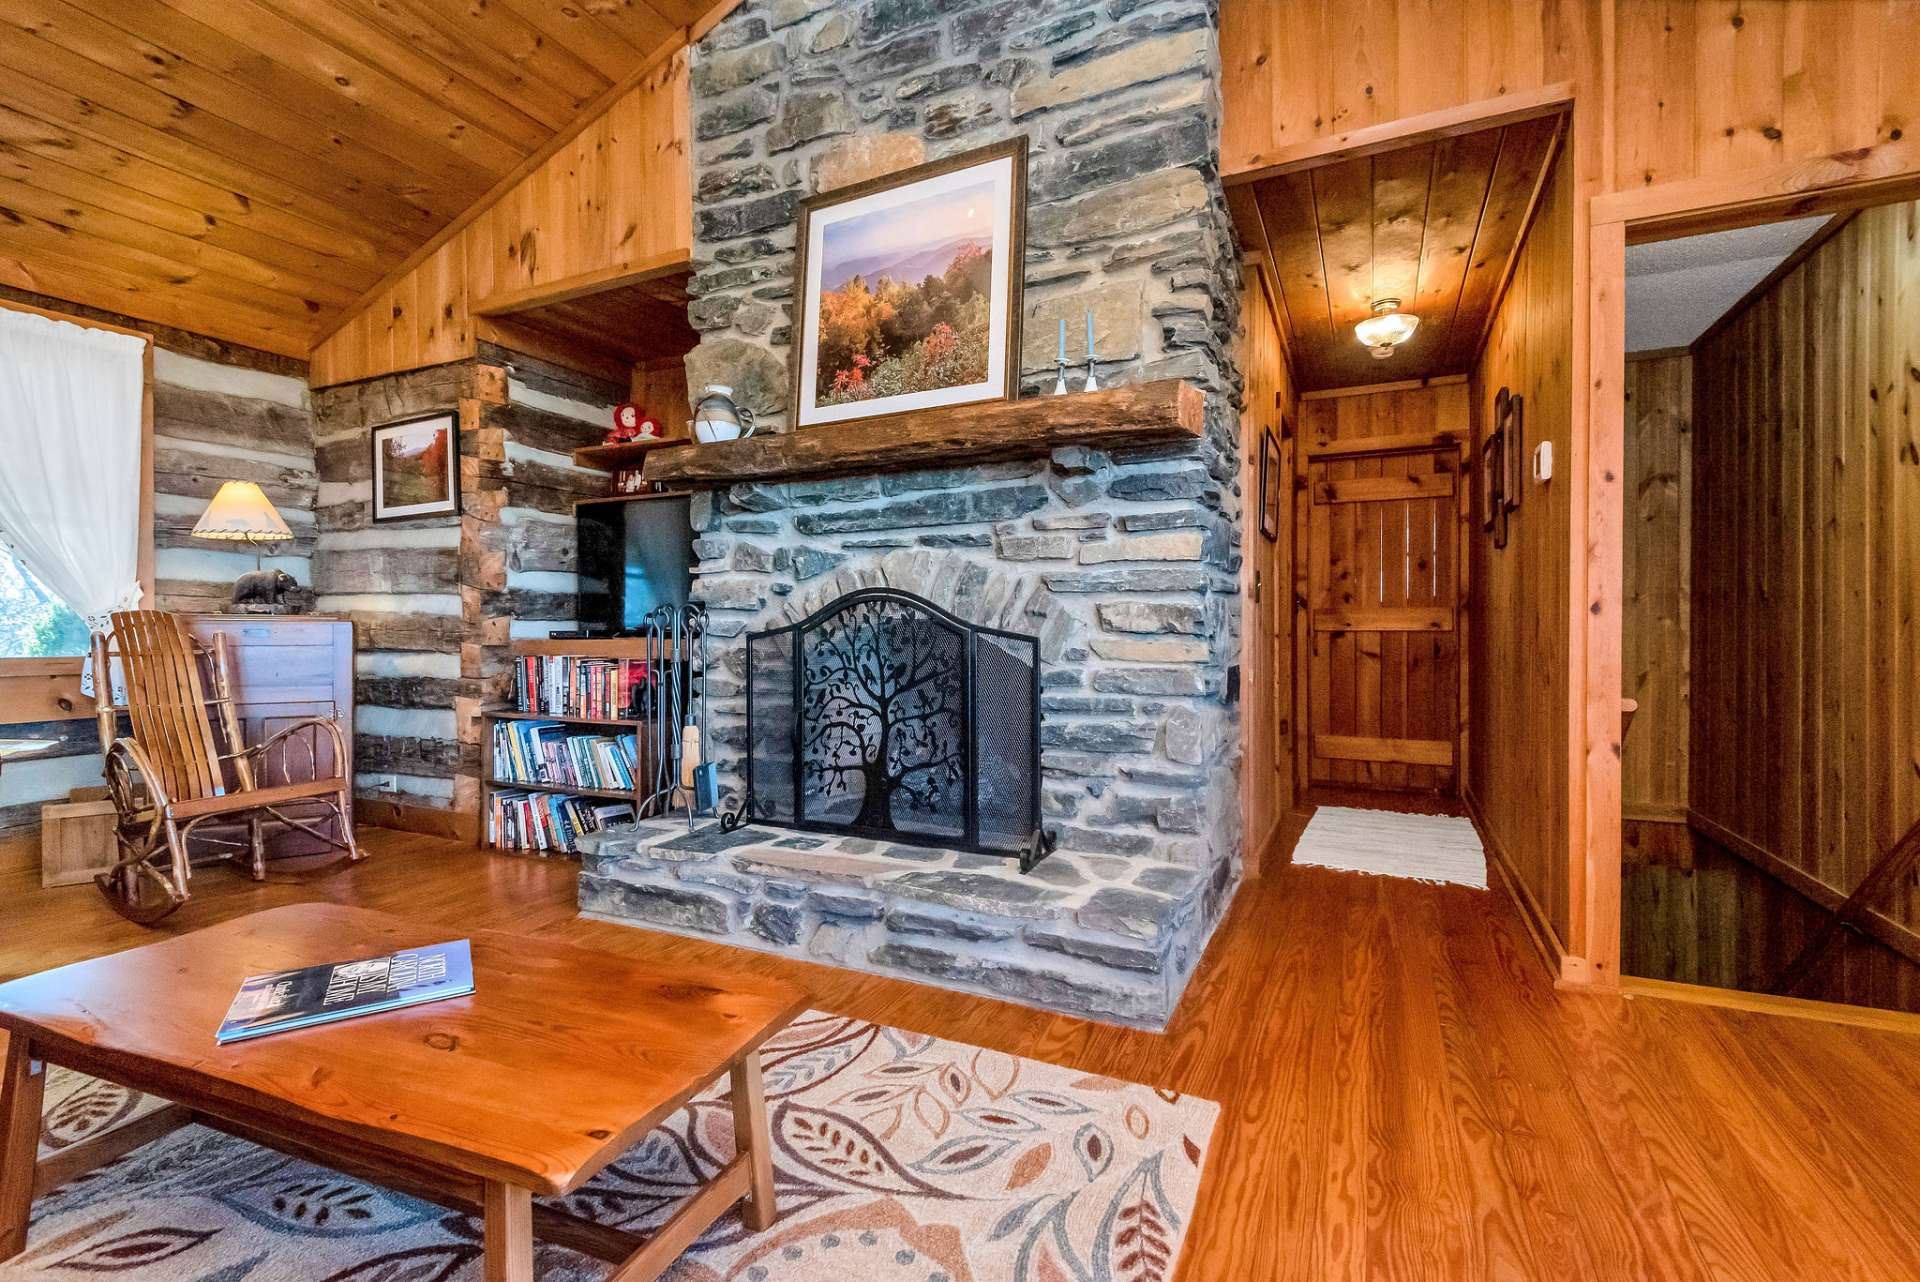 Native stone fireplace is the heart of this Stonebridge cabin.